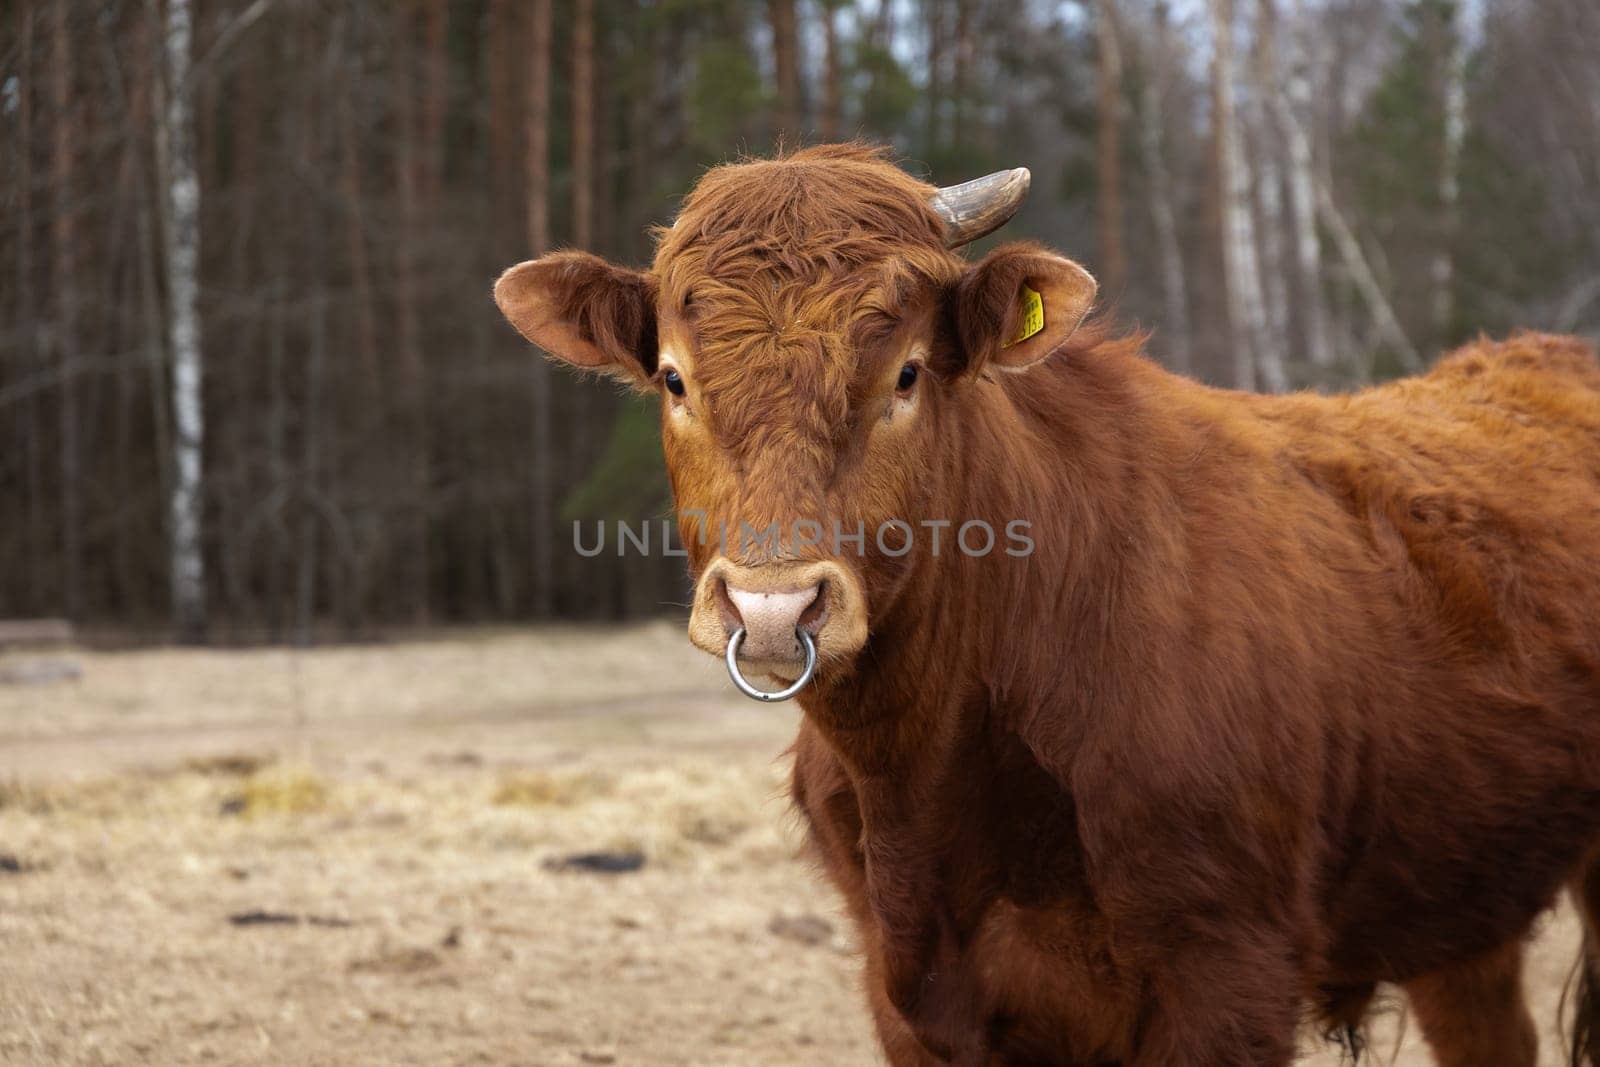 A single brown cow standing stoically on top of a vast dirt field under the clear sky on a sunny day.